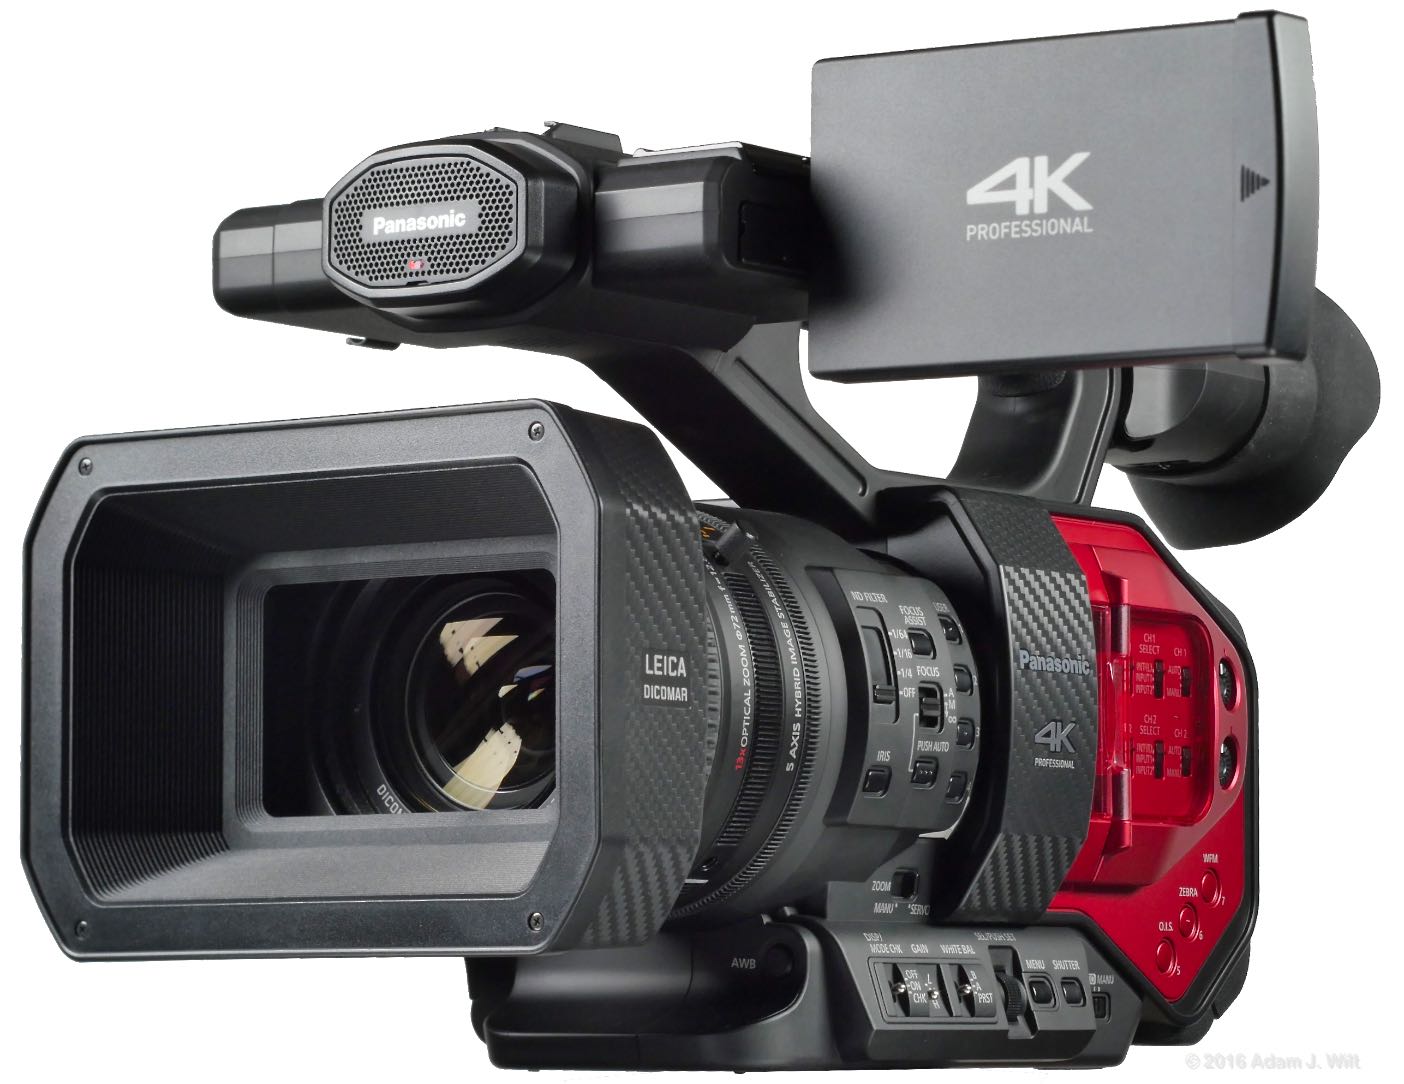 Review: Panasonic AG-DVX200 4/3” SD-to-4K fixed-lens camcorder